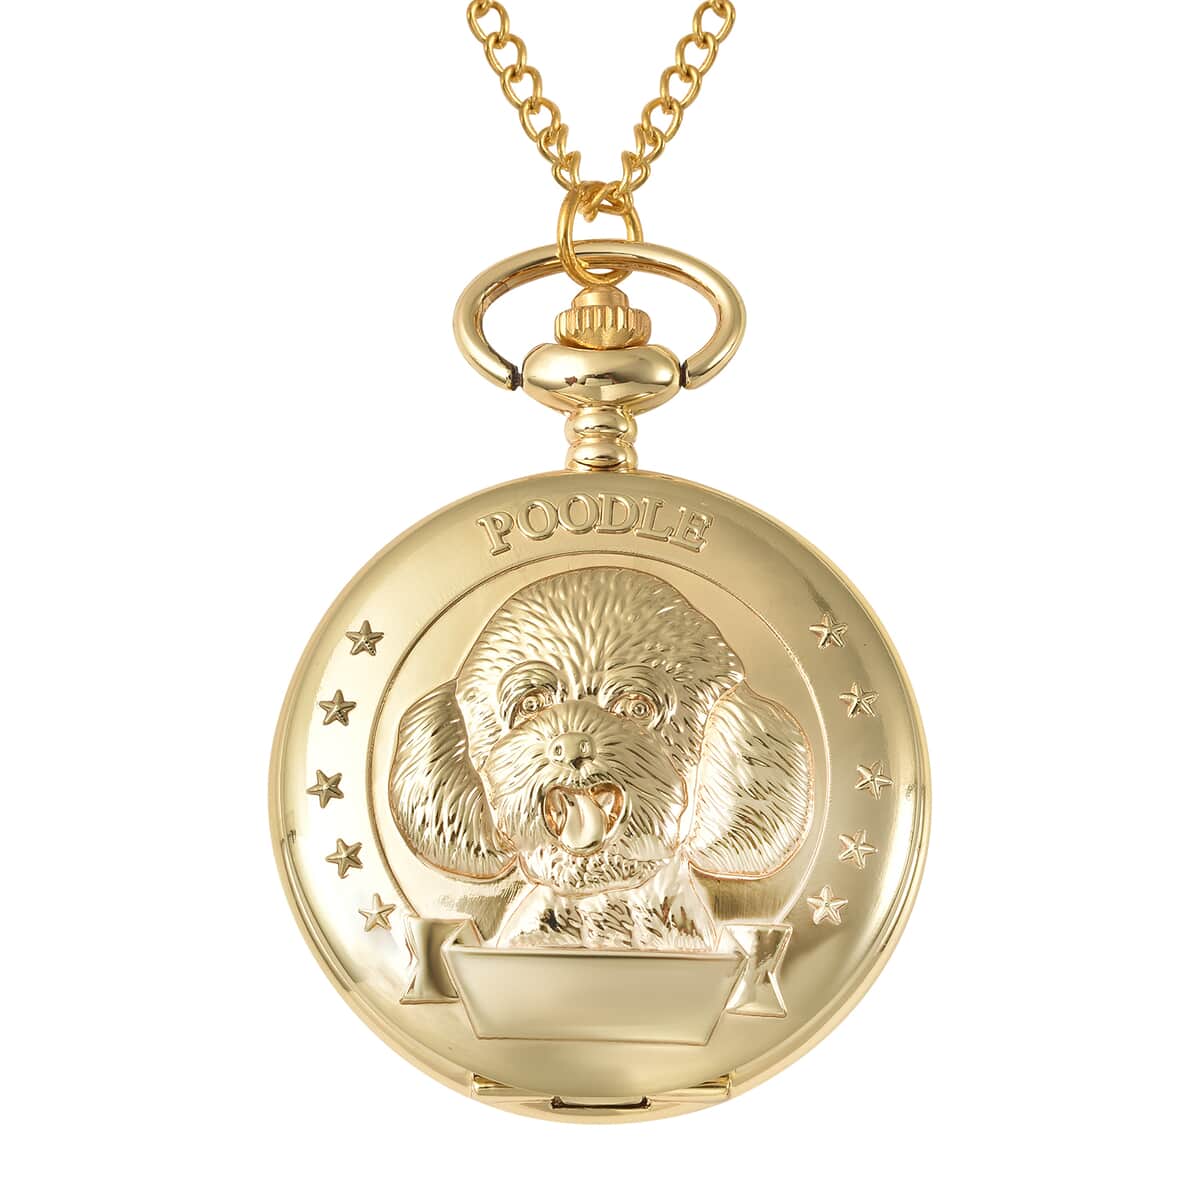 Strada Japanese Movement Poodle Pocket Watch in Goldtone with Chain (31 Inches) image number 0